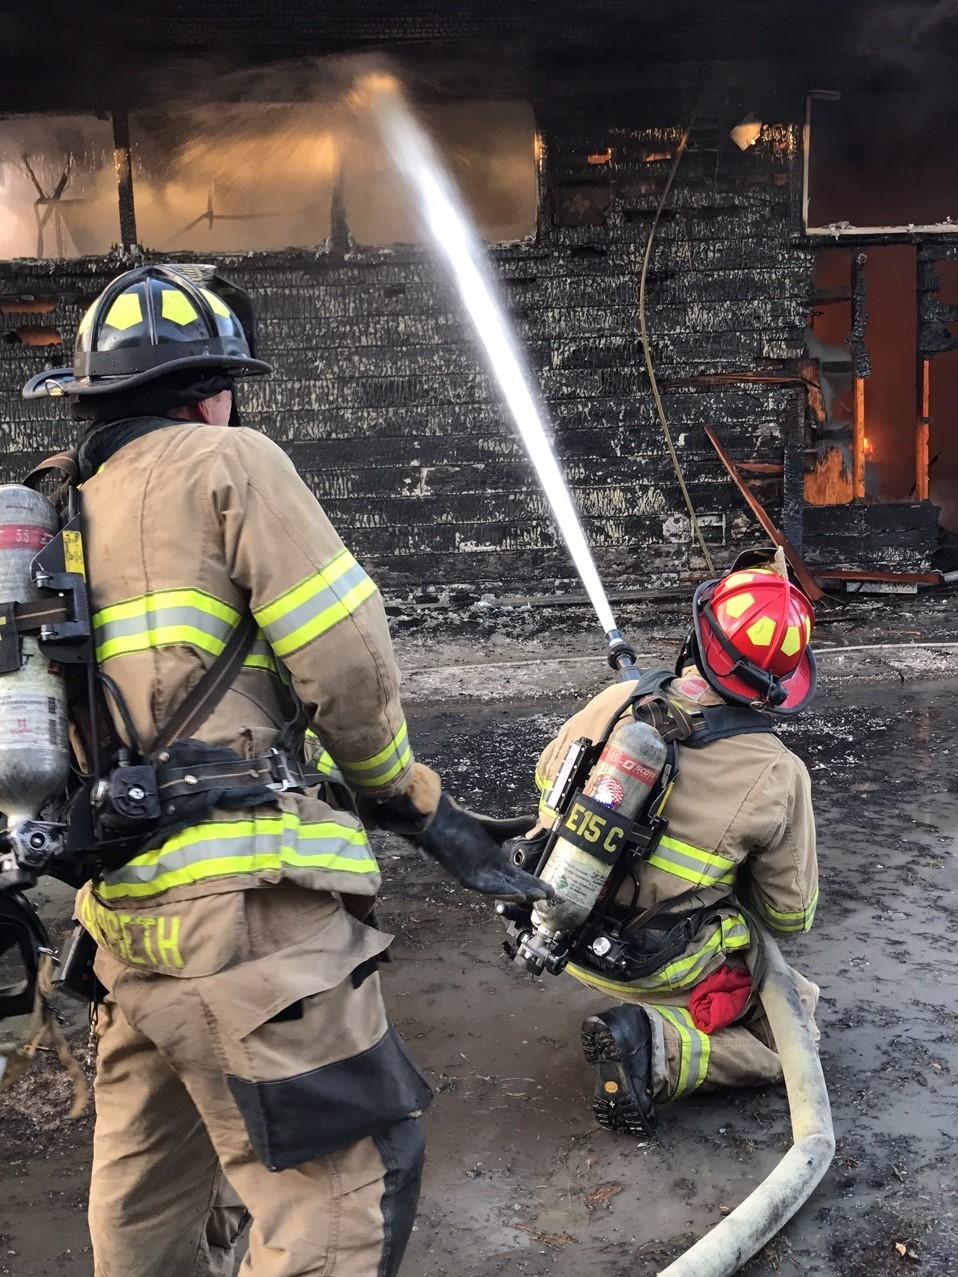 SELECTION PROCESS: To be considered for this recruitment, you must be on the Firefighter Candidate Testing Center (FCTC) Statewide Eligibility List. Ceres Fire is hiring directly off of this list.